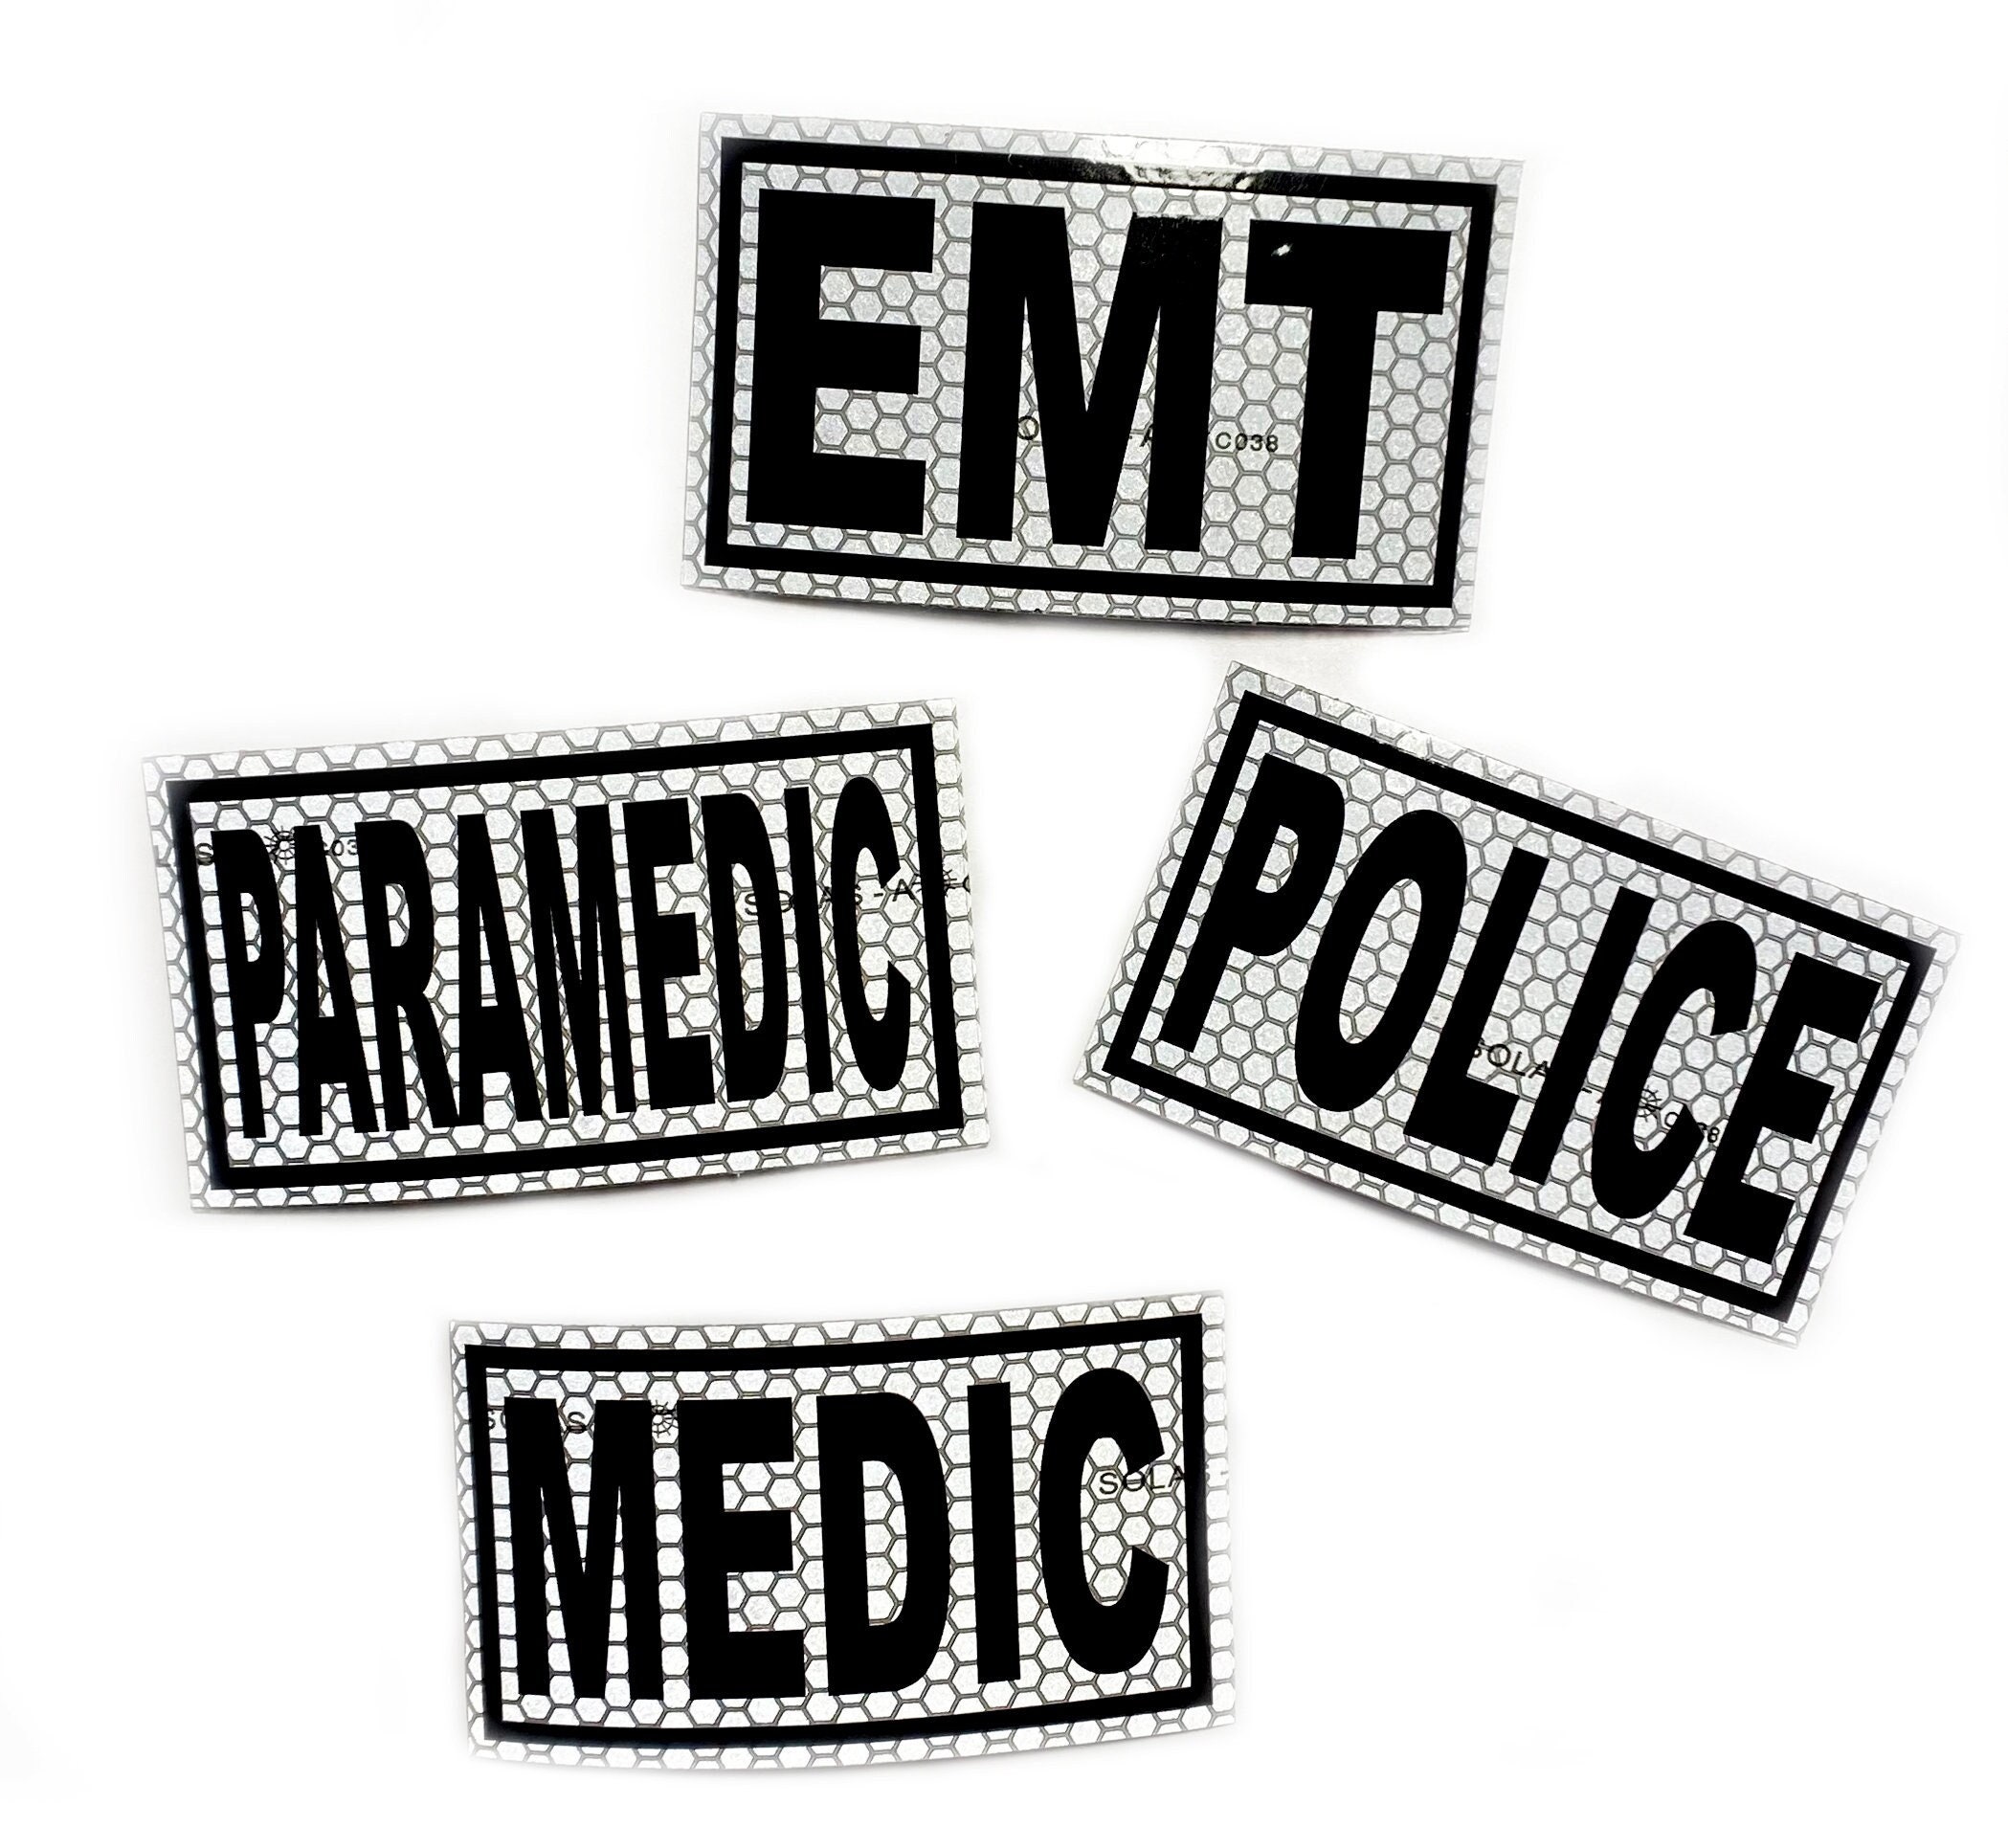 EMT PARAMEDIC Badge PATCH Rescue iron-on embroidered Star of Life applique